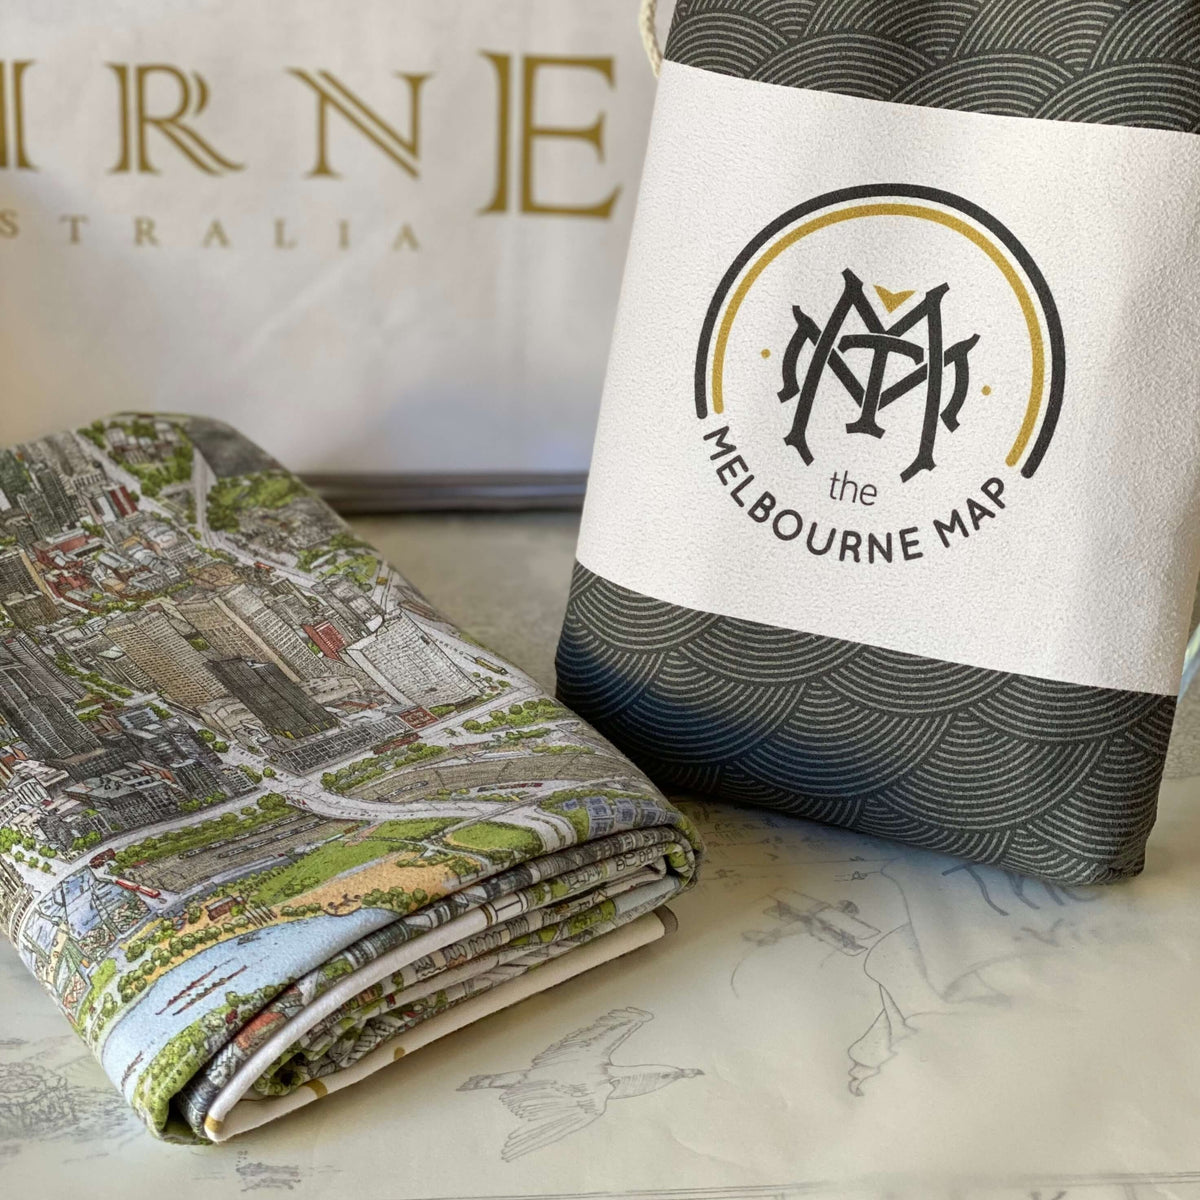 The Melbourne Map Beach Towel folded next to its bag showing how lightweight and compact it is. 